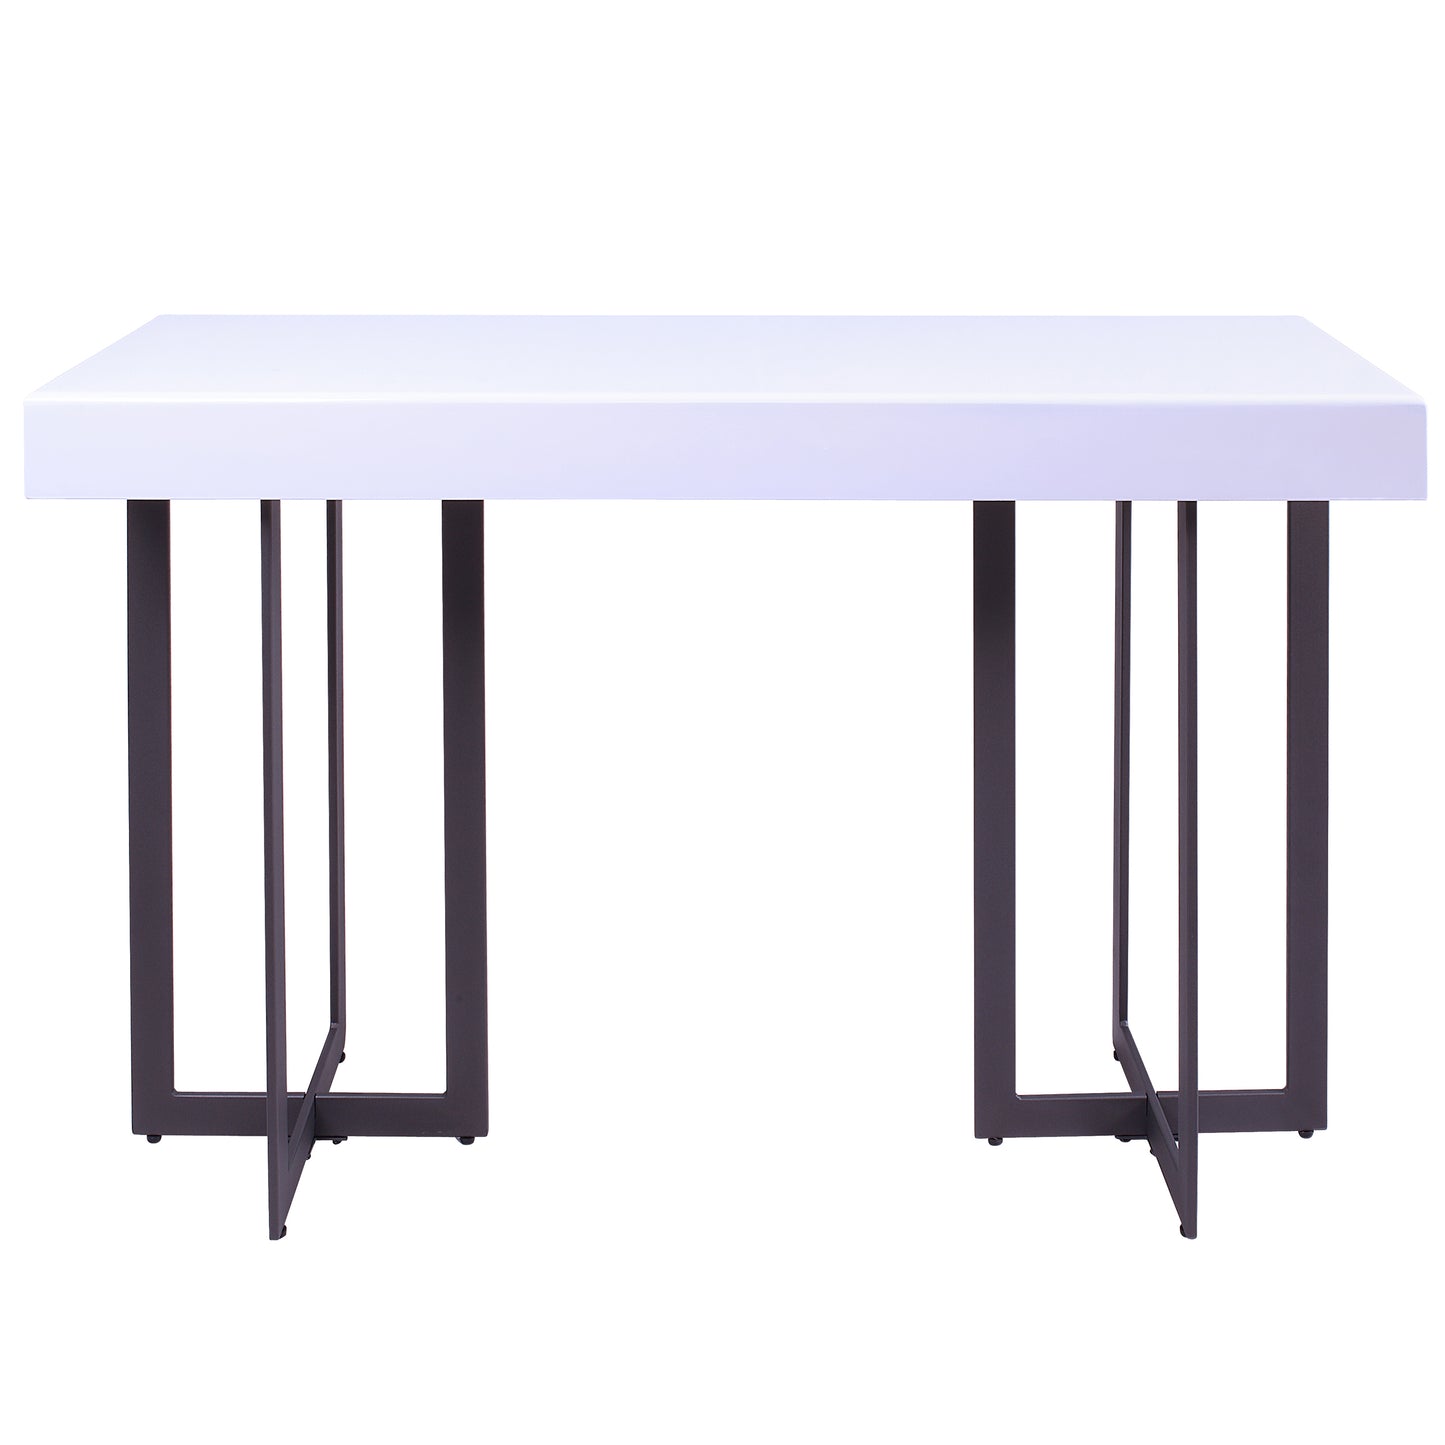 Front-facing console table only back view from a three-piece modern white high gloss and gunmetal storage coffee table set with hidden drawers on a white background